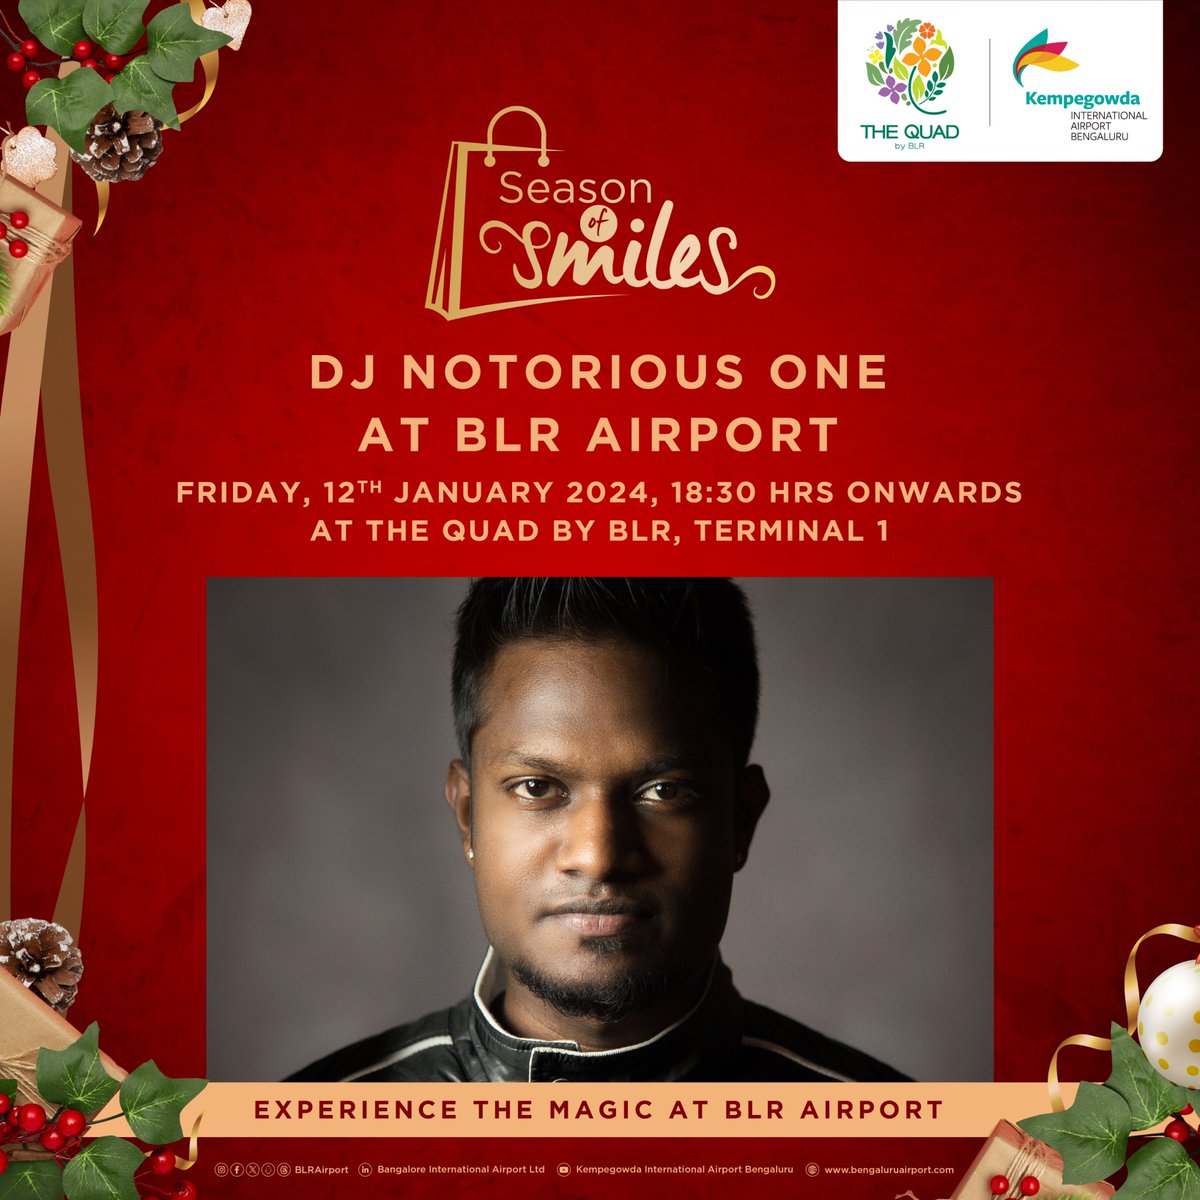 Music is in the air! Enjoy live beats by DJ Notorious One this Friday at The Quad by BLR

#BLRAirport #QuadbyBLR #RockOn #LiveMusic #HolidayCheer #Travelmadespecial #Festivetravel #holidayseason #AirportGigs #FestiveMelodies #JourneyInTune #BLRAirport #festivemusic